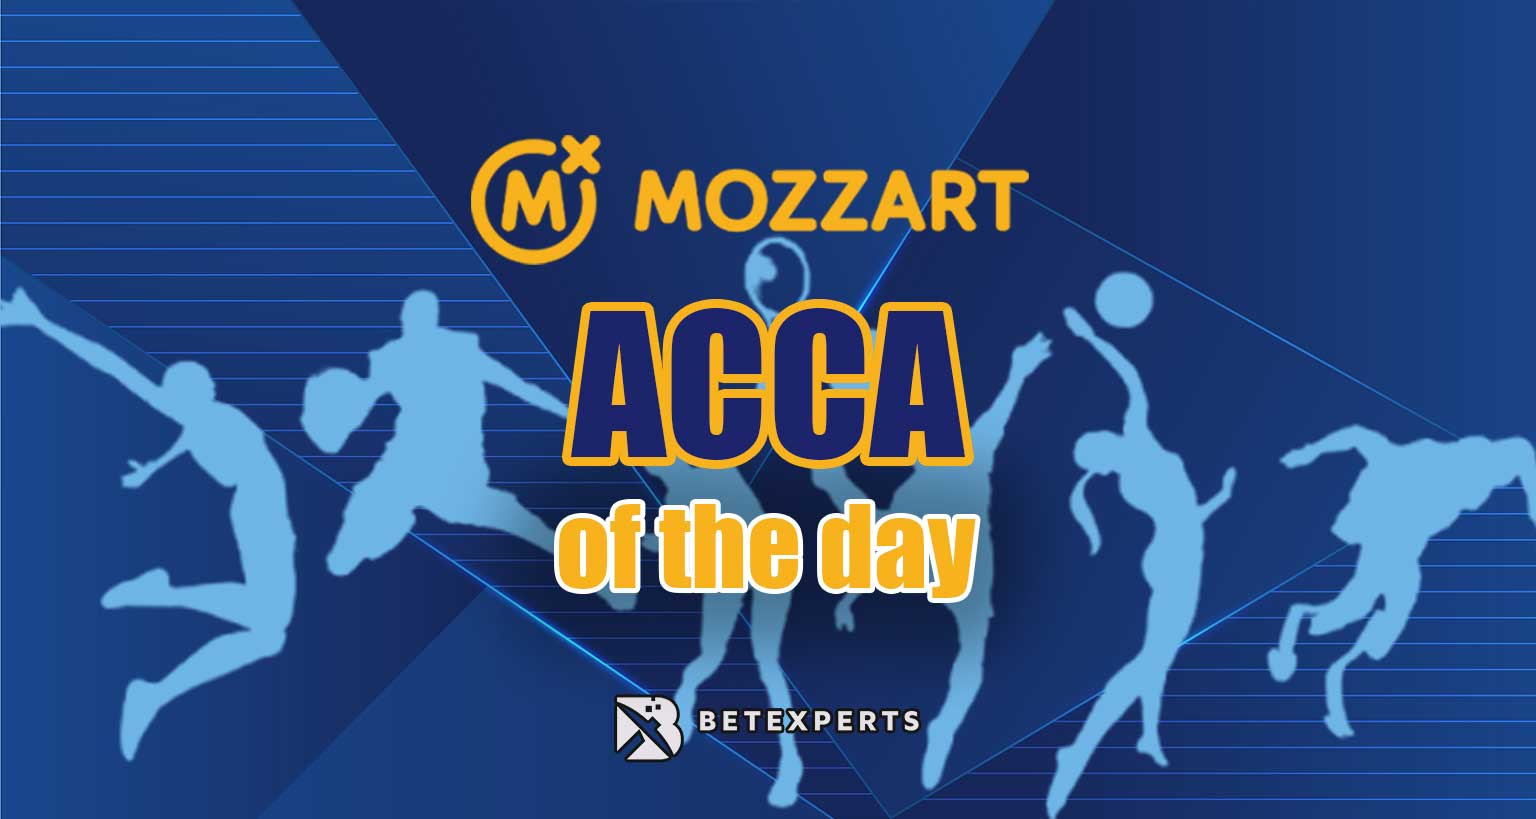 Mozzart ACCA of the day